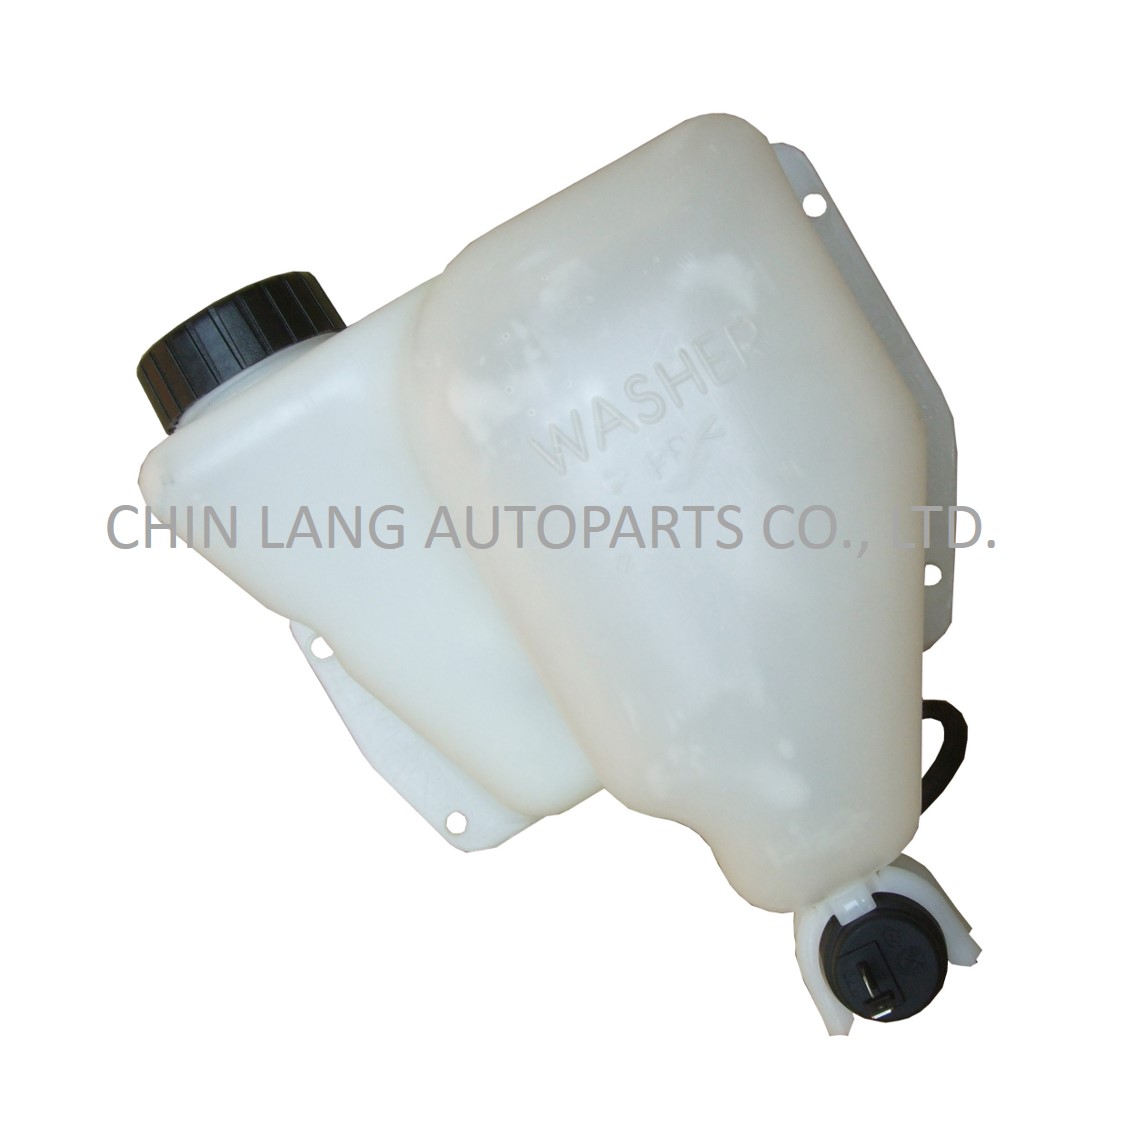 WINDSHIELD WASHER FOR PETERBILT 357,367,375,377,378,379 90'~96', 01'~05' -CL-2020B